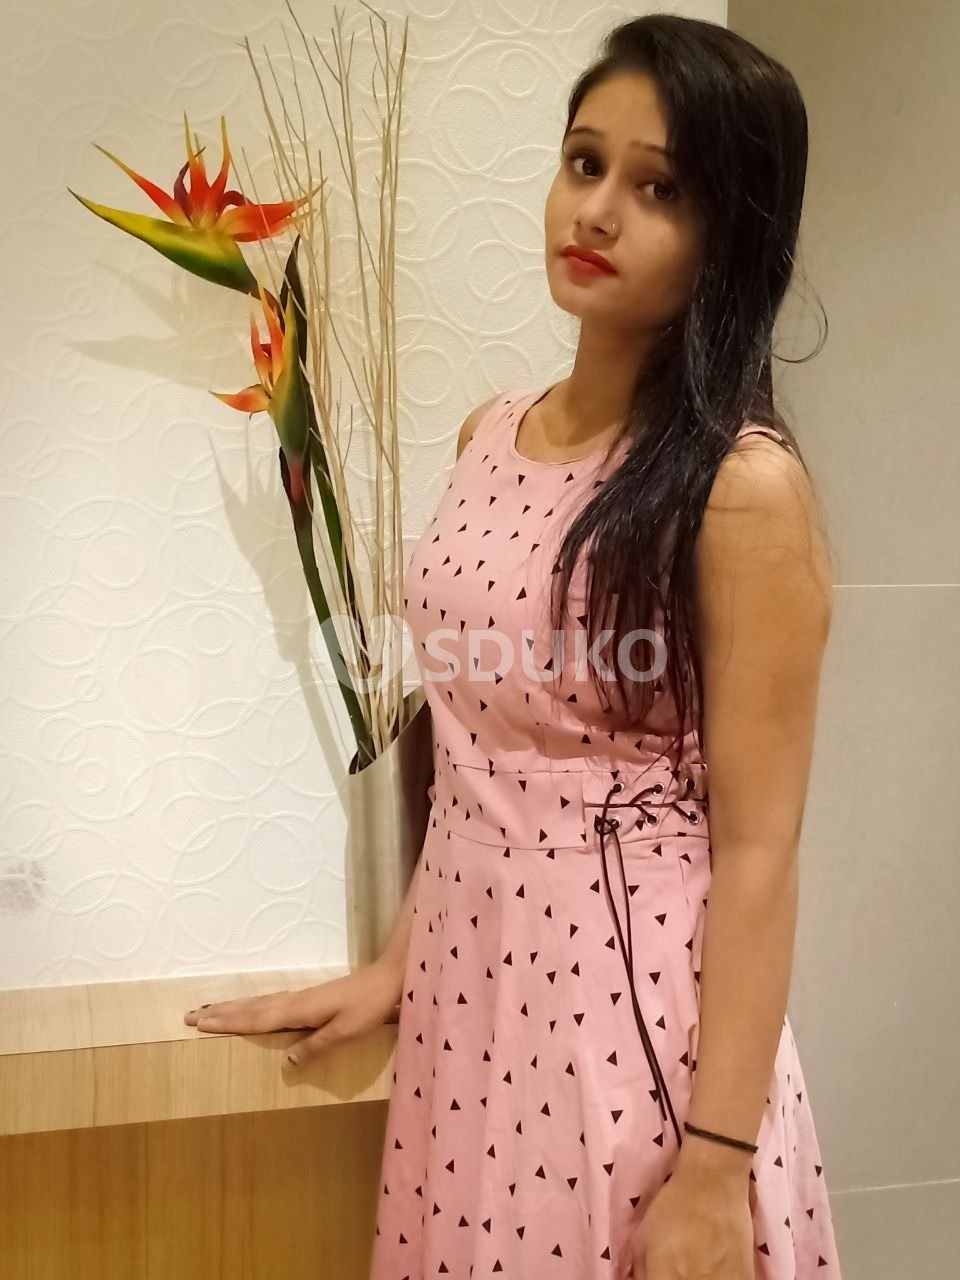 SPECIAL ANANTAPUR DOORSTEP HIGH PROFESSIONAL DIVYA Escorts AGENCY TOP MODEL PROVIDED. BOOK NOW